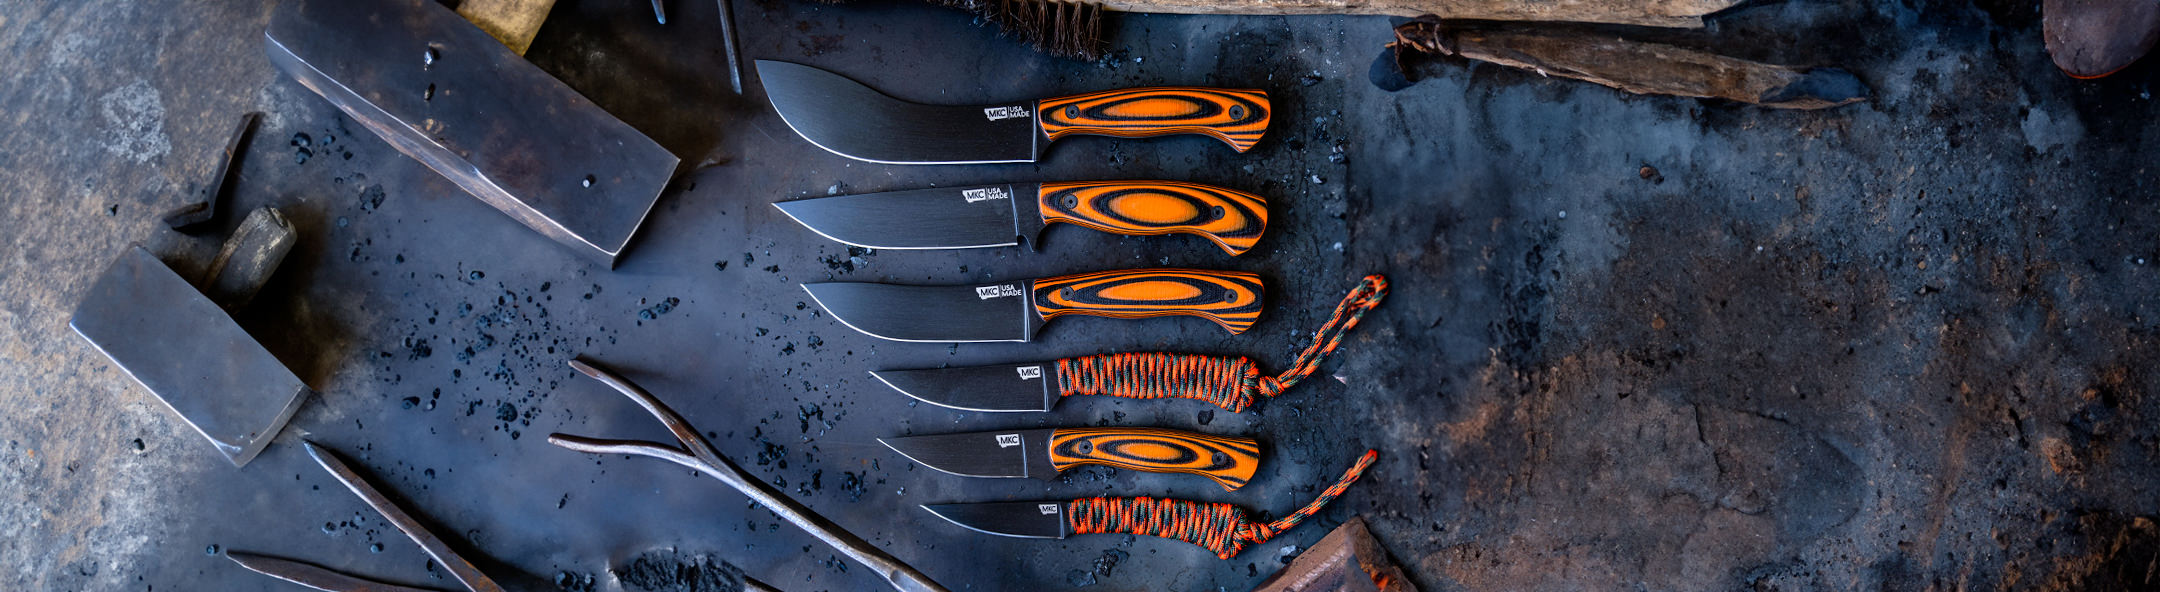 Knives on a concrete surface